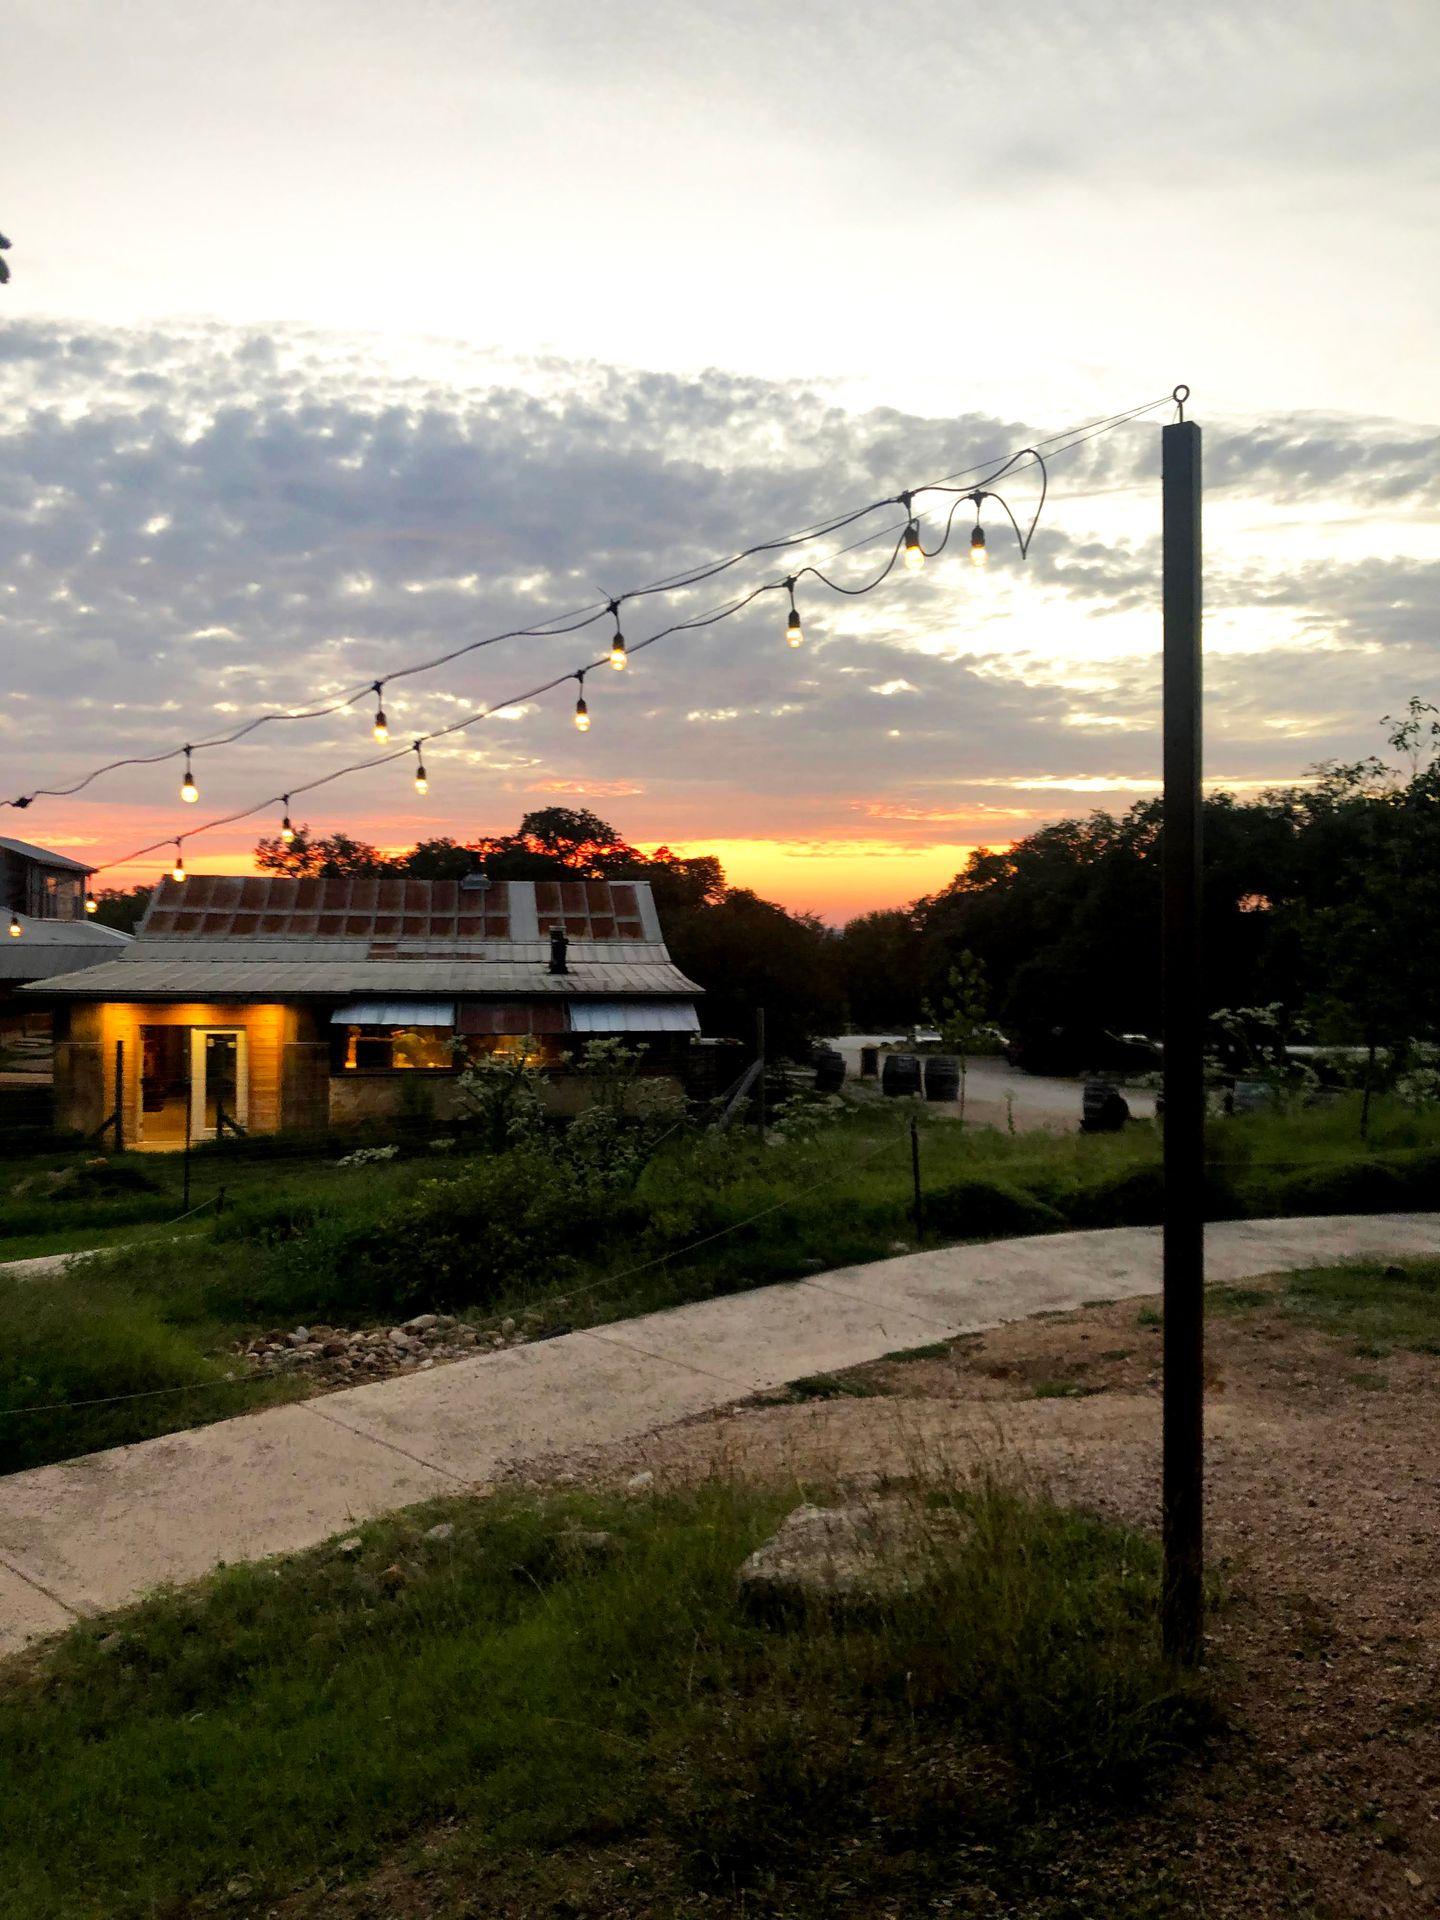 The sun setting over the Jester King Brewery.